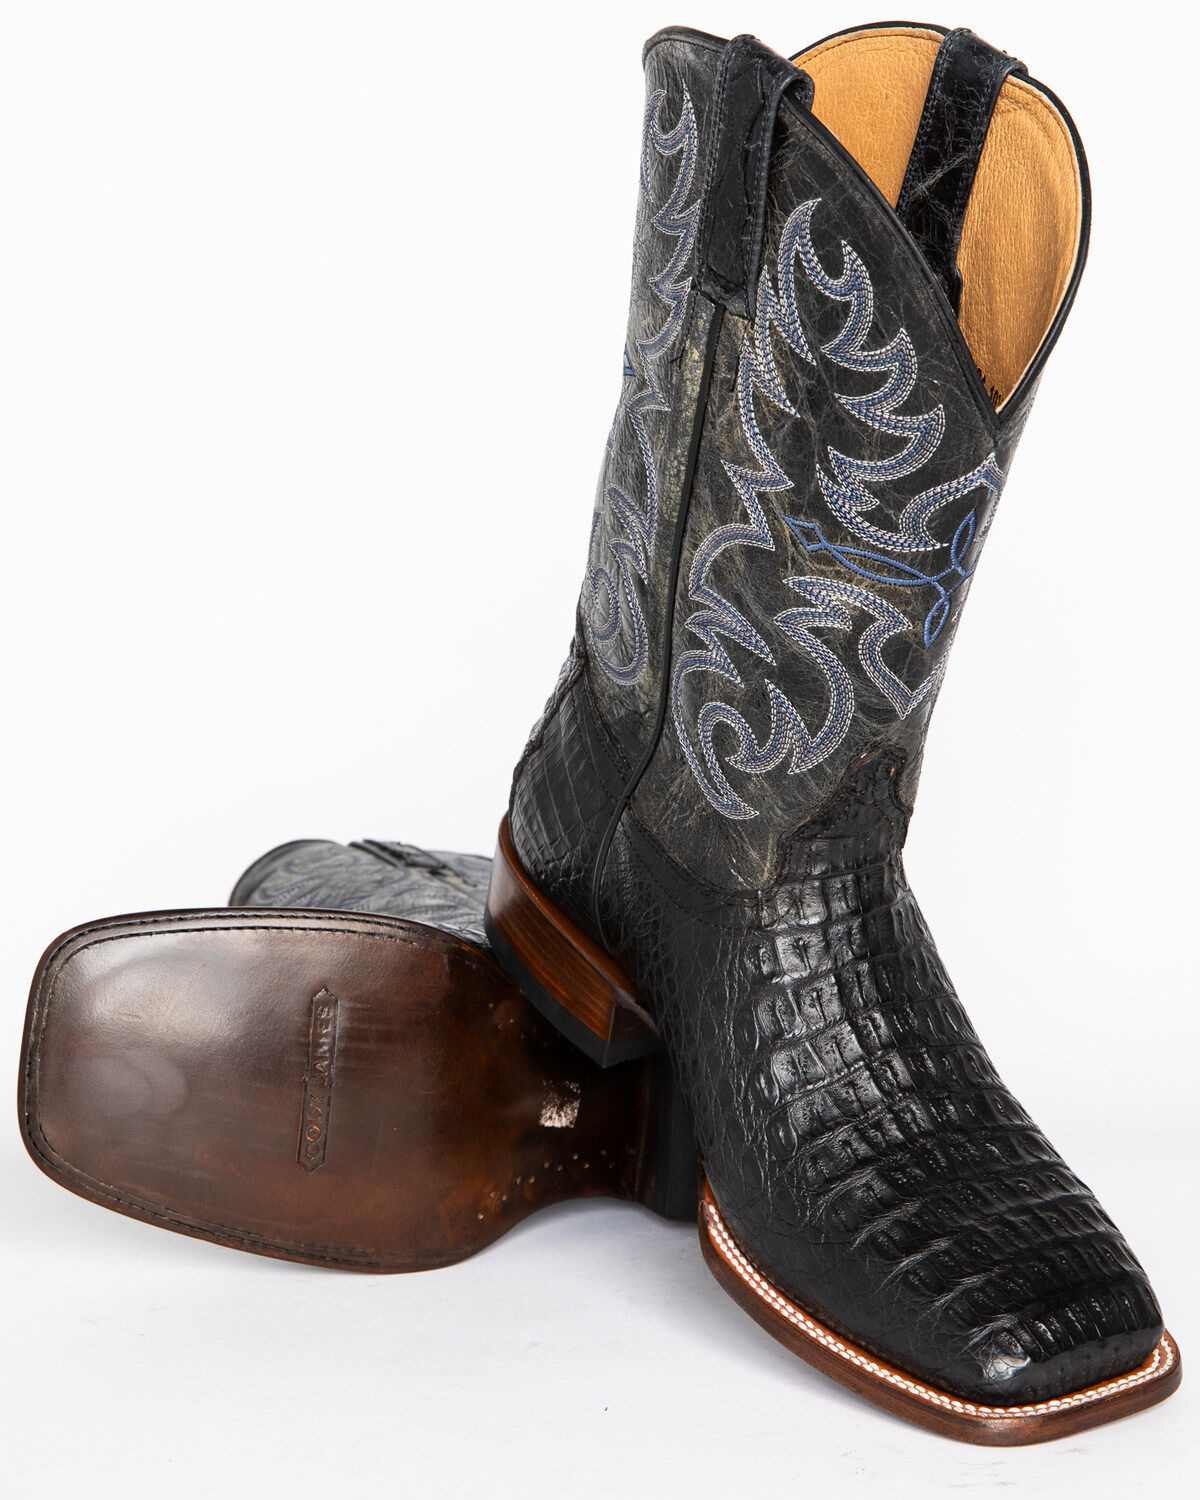 Caiman Embroidered Exotic Boots | Boot Barn